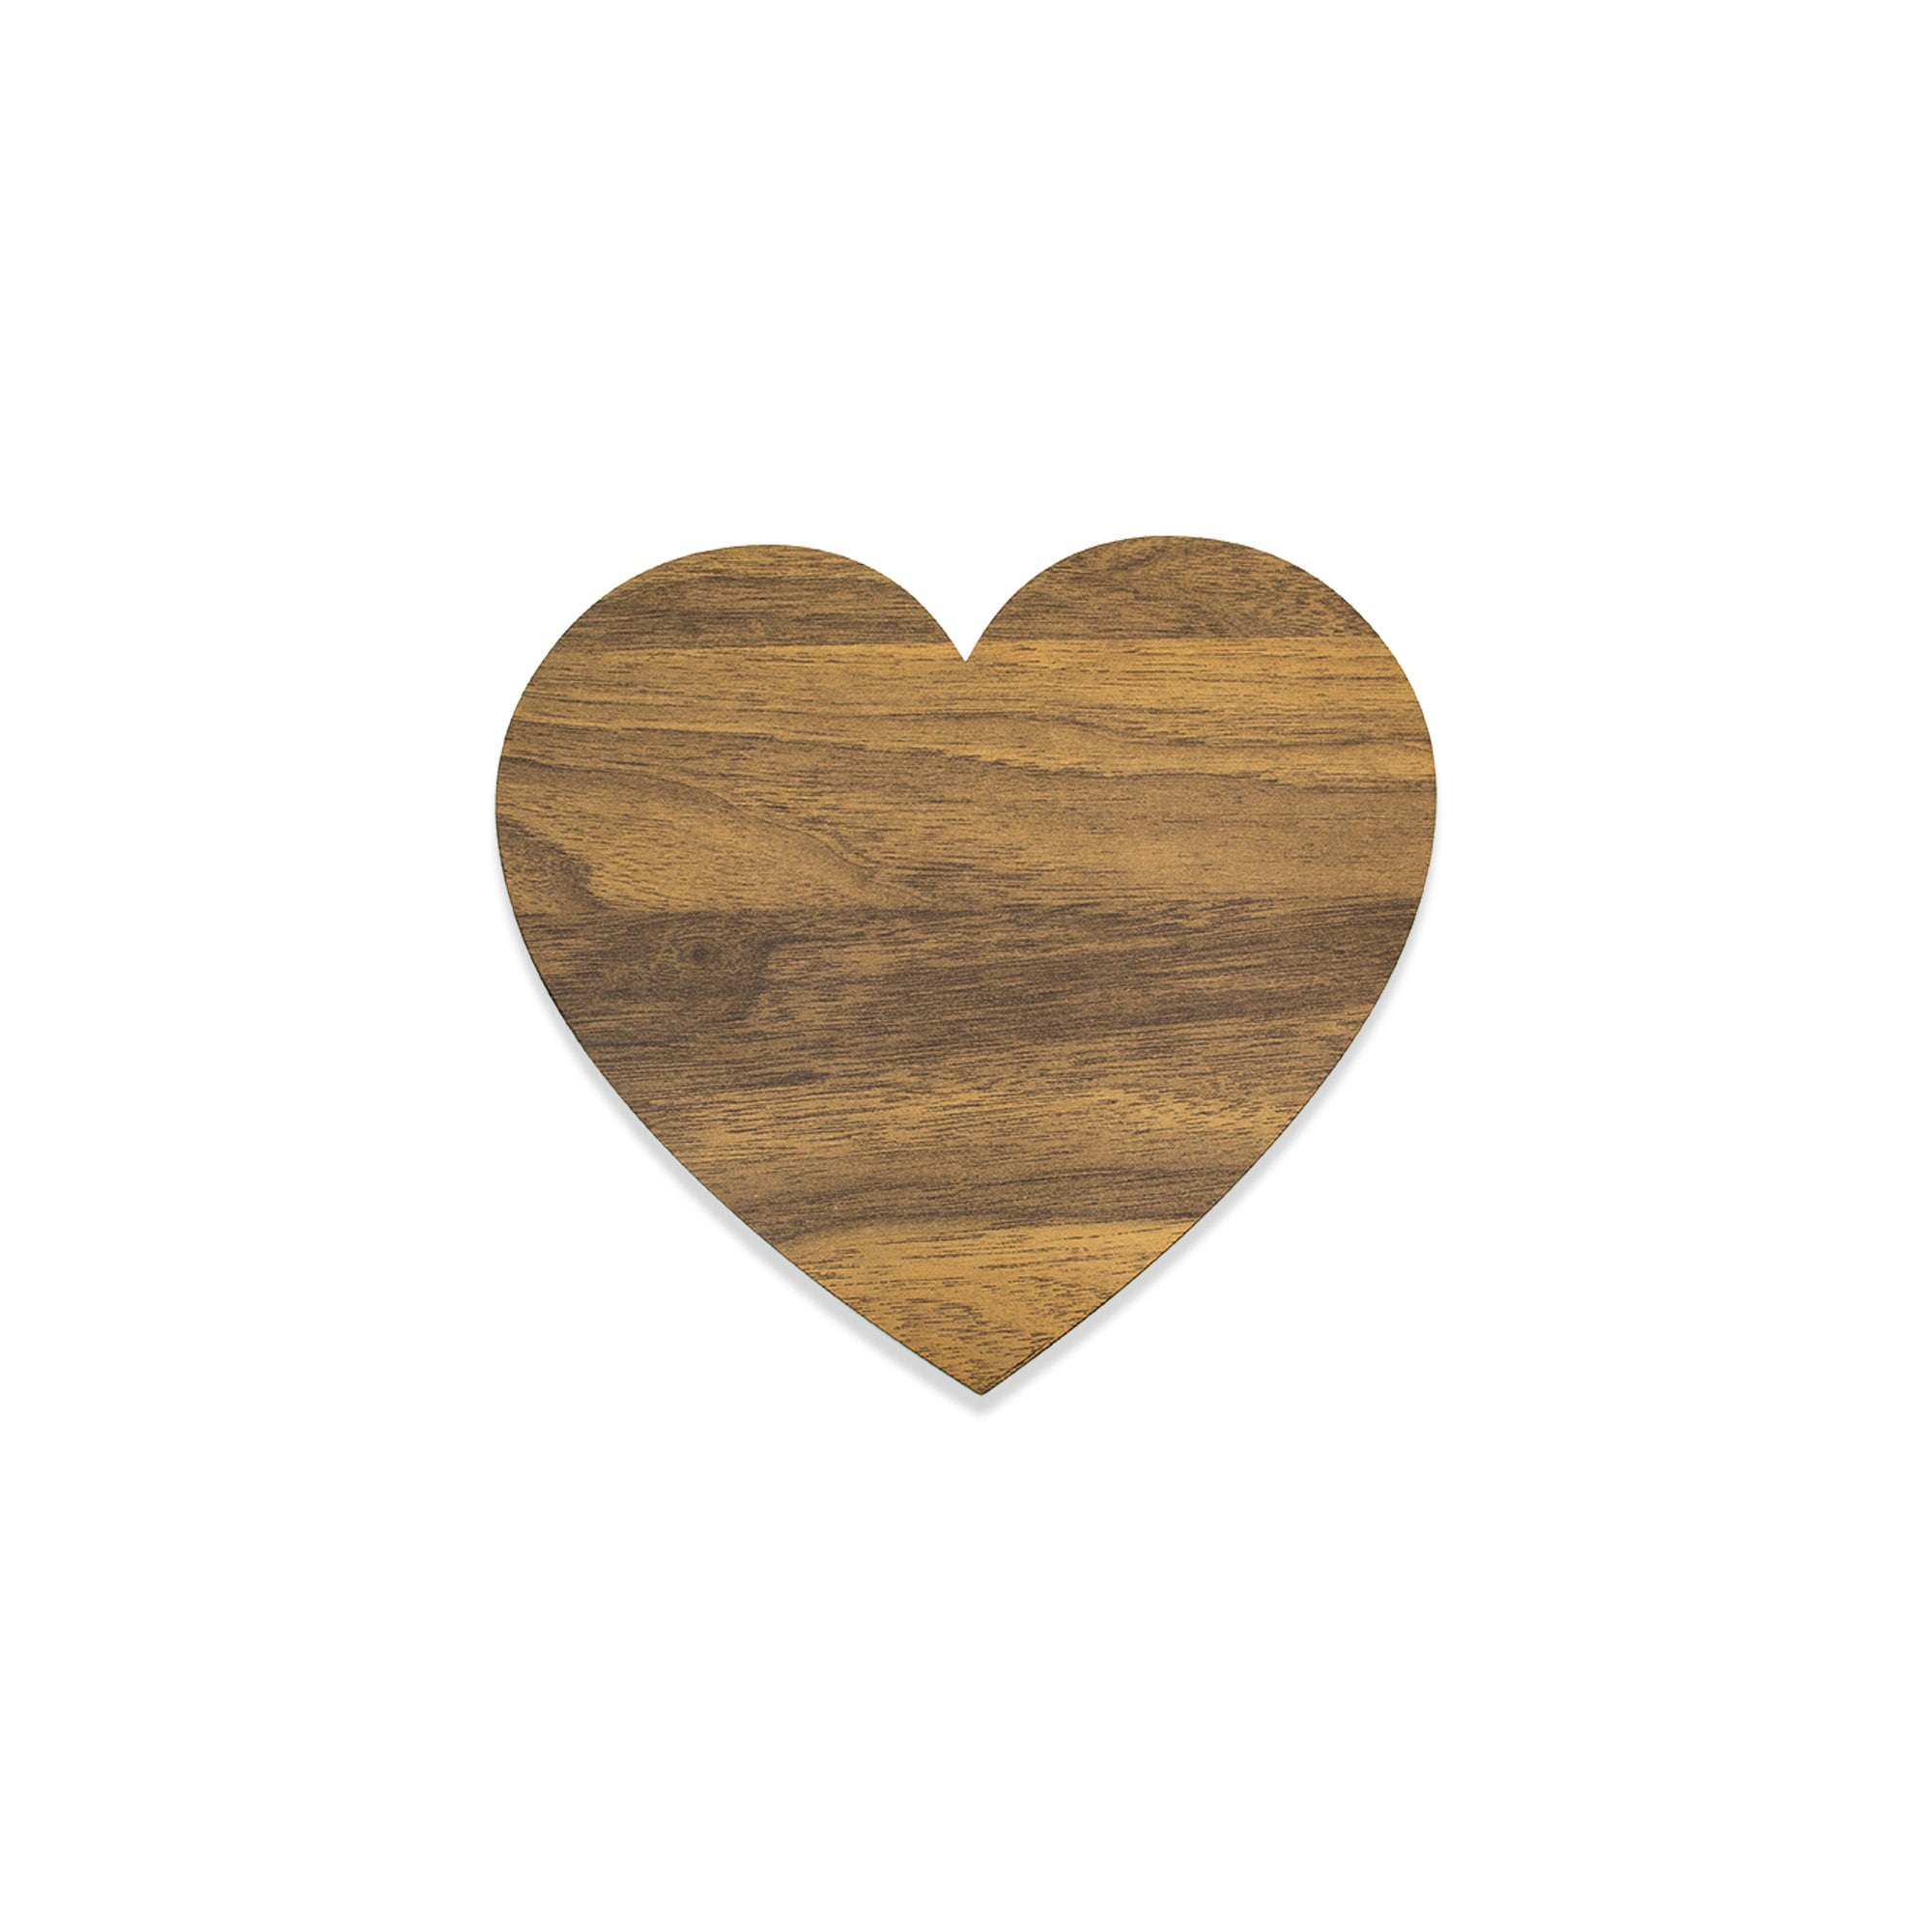 Heart Sign Wood Love Wall Signs for Home Decor Heart Sign for Wall LISHD Heart Holding Hands Wall Decor Decorative Art Sculpture Holding Hands Wall Art 